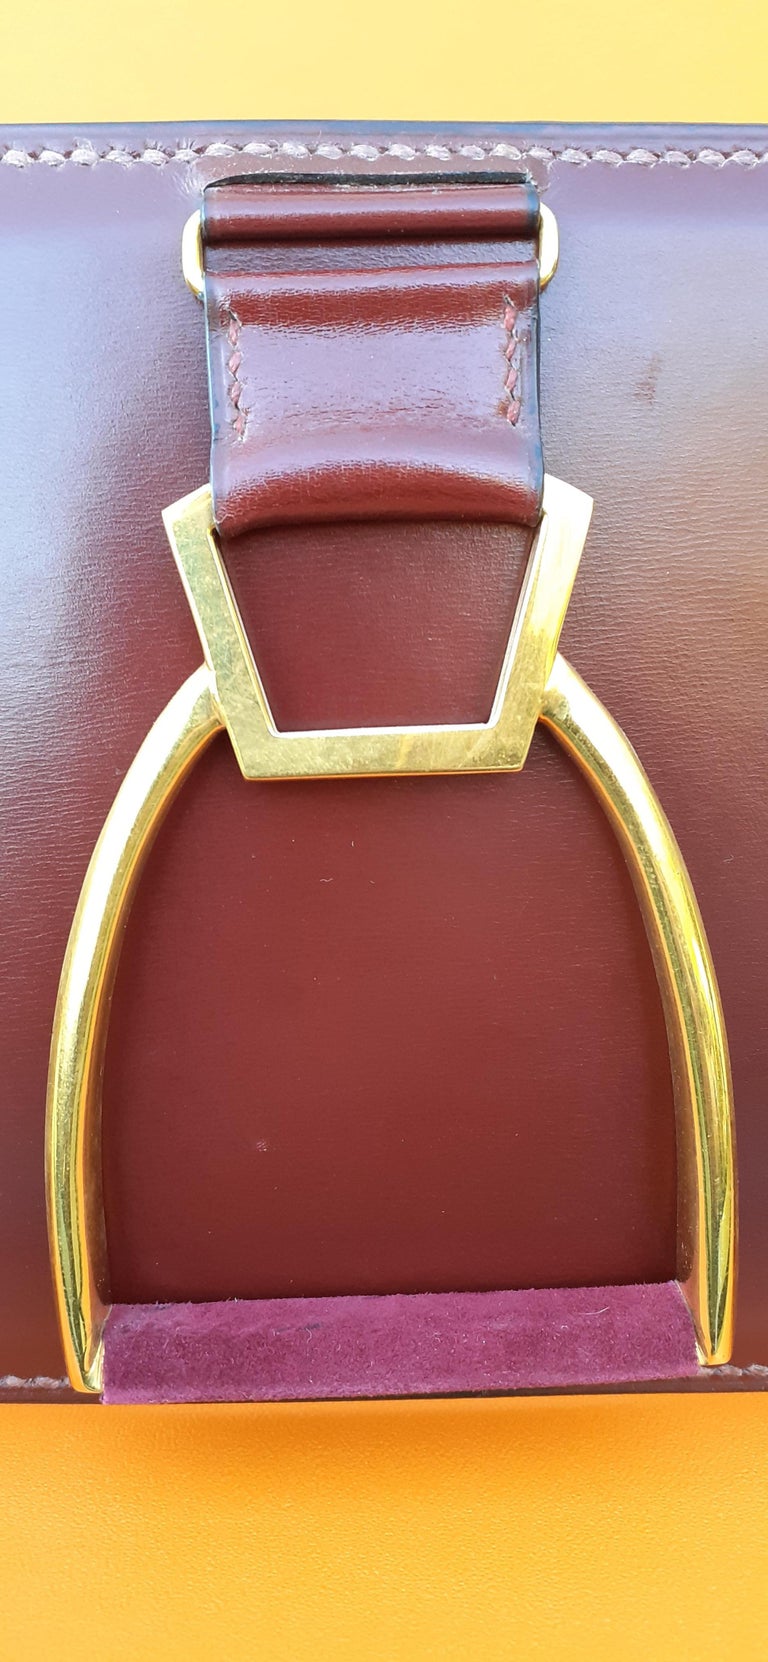 Exceptional Hermès Tie Hanger Tie Rack 3 Stirrups in Metal and Leather For Sale 4